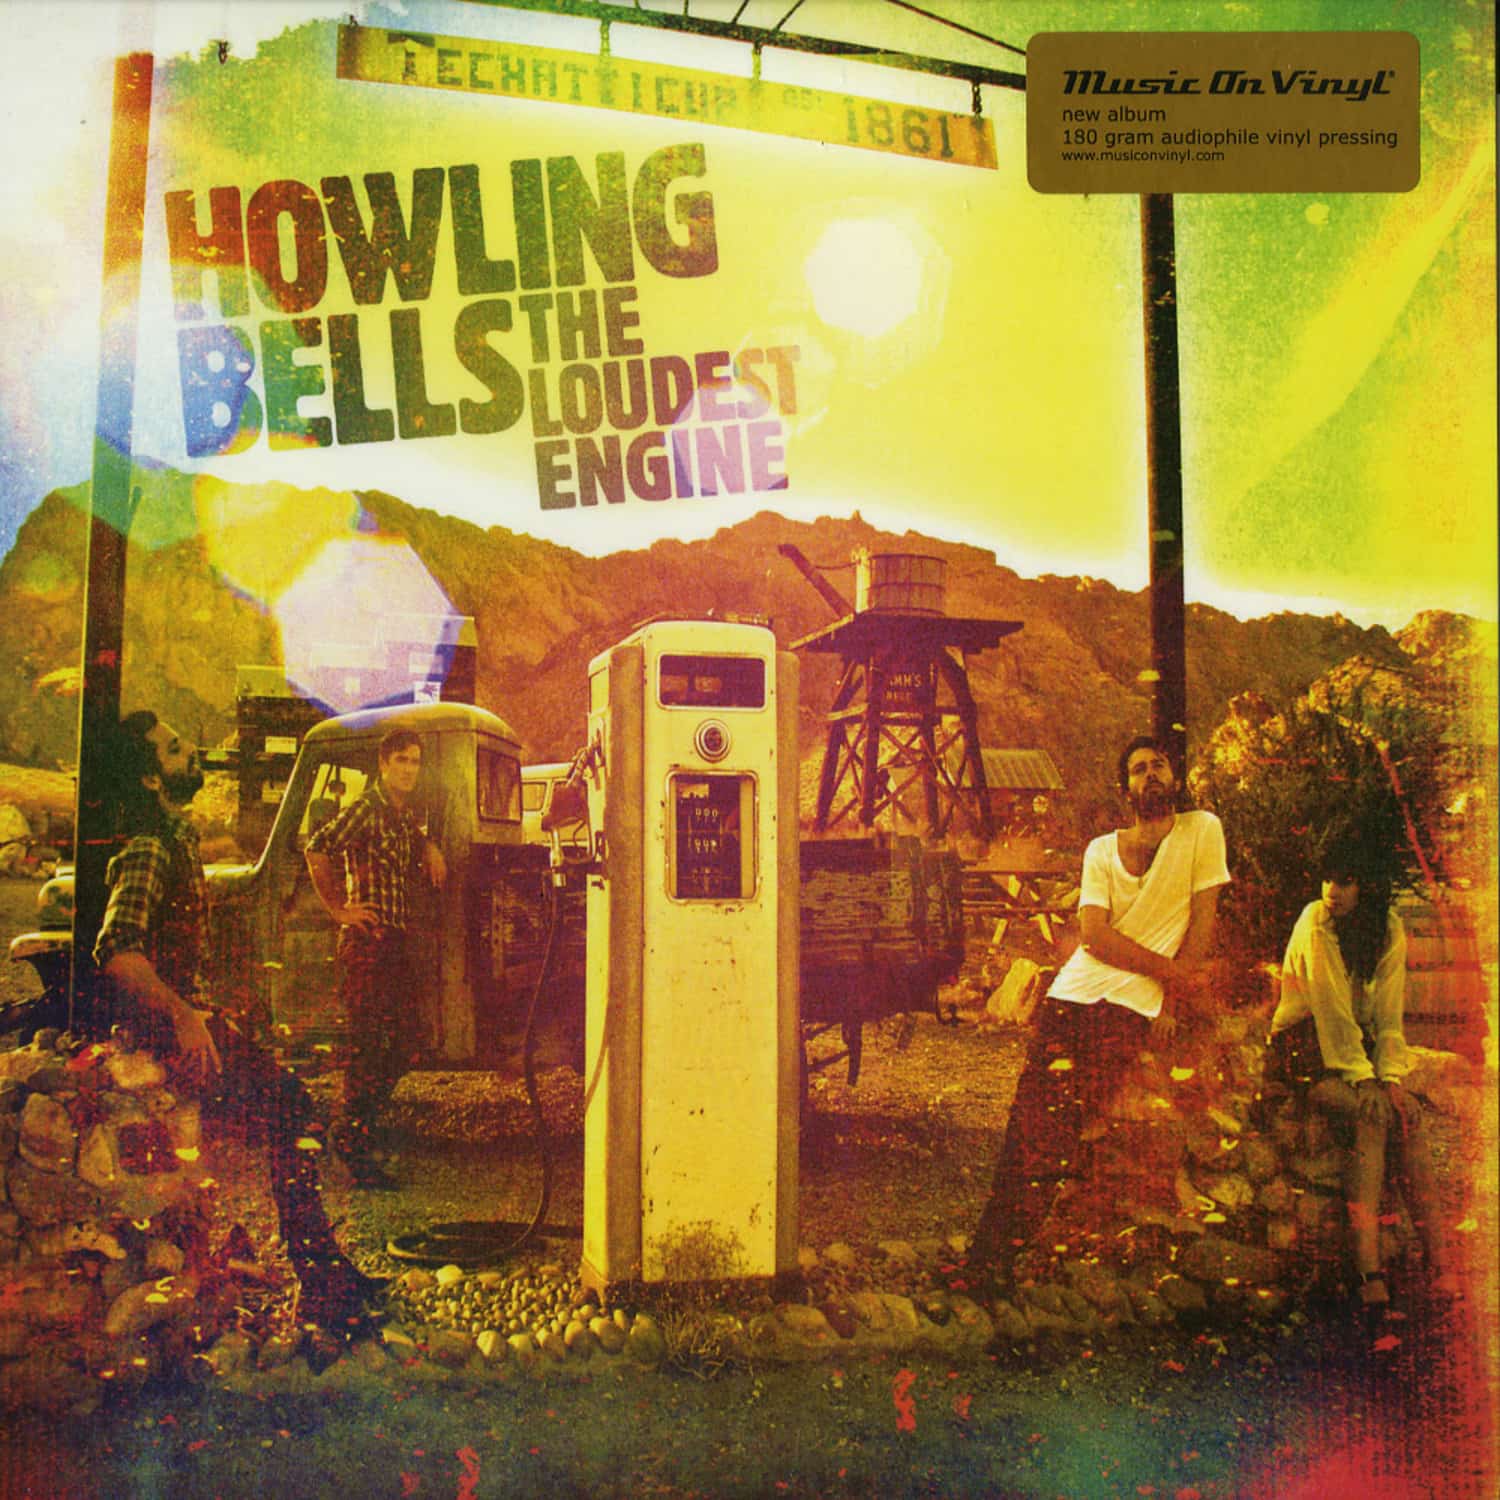 Howling Bells - THE LOUDEST ENGINE 